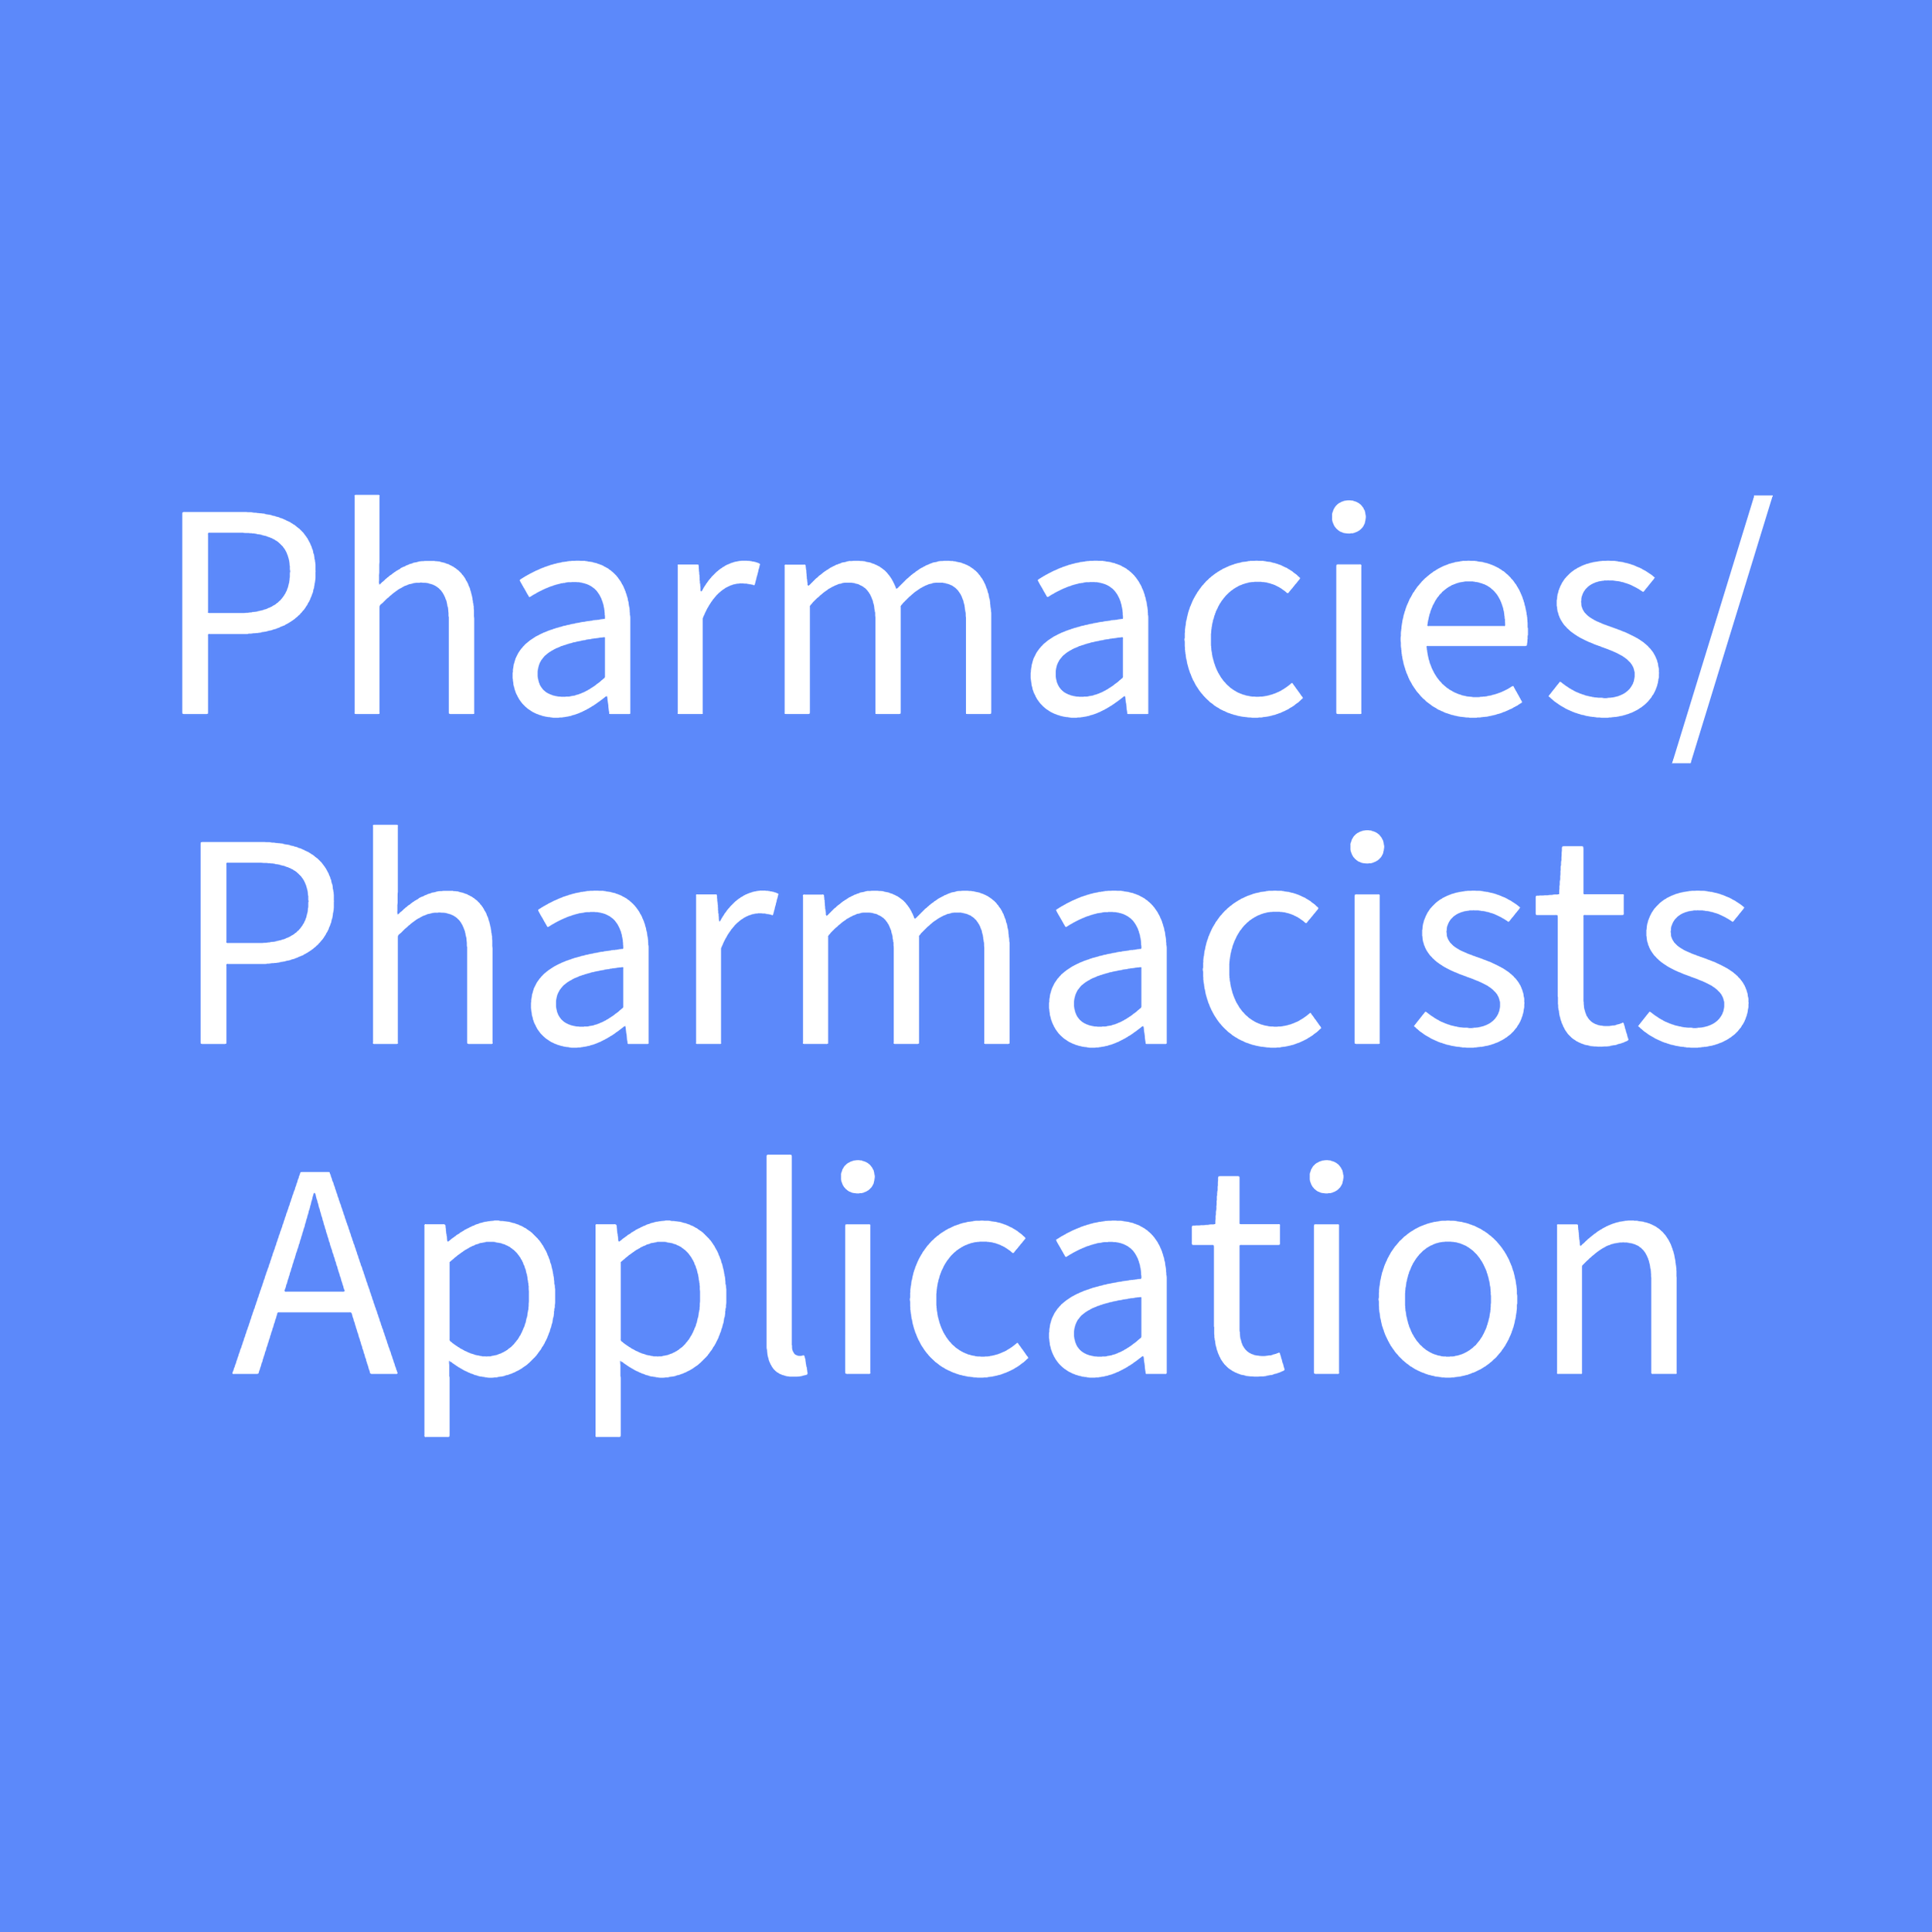 Pharmacists Application.png